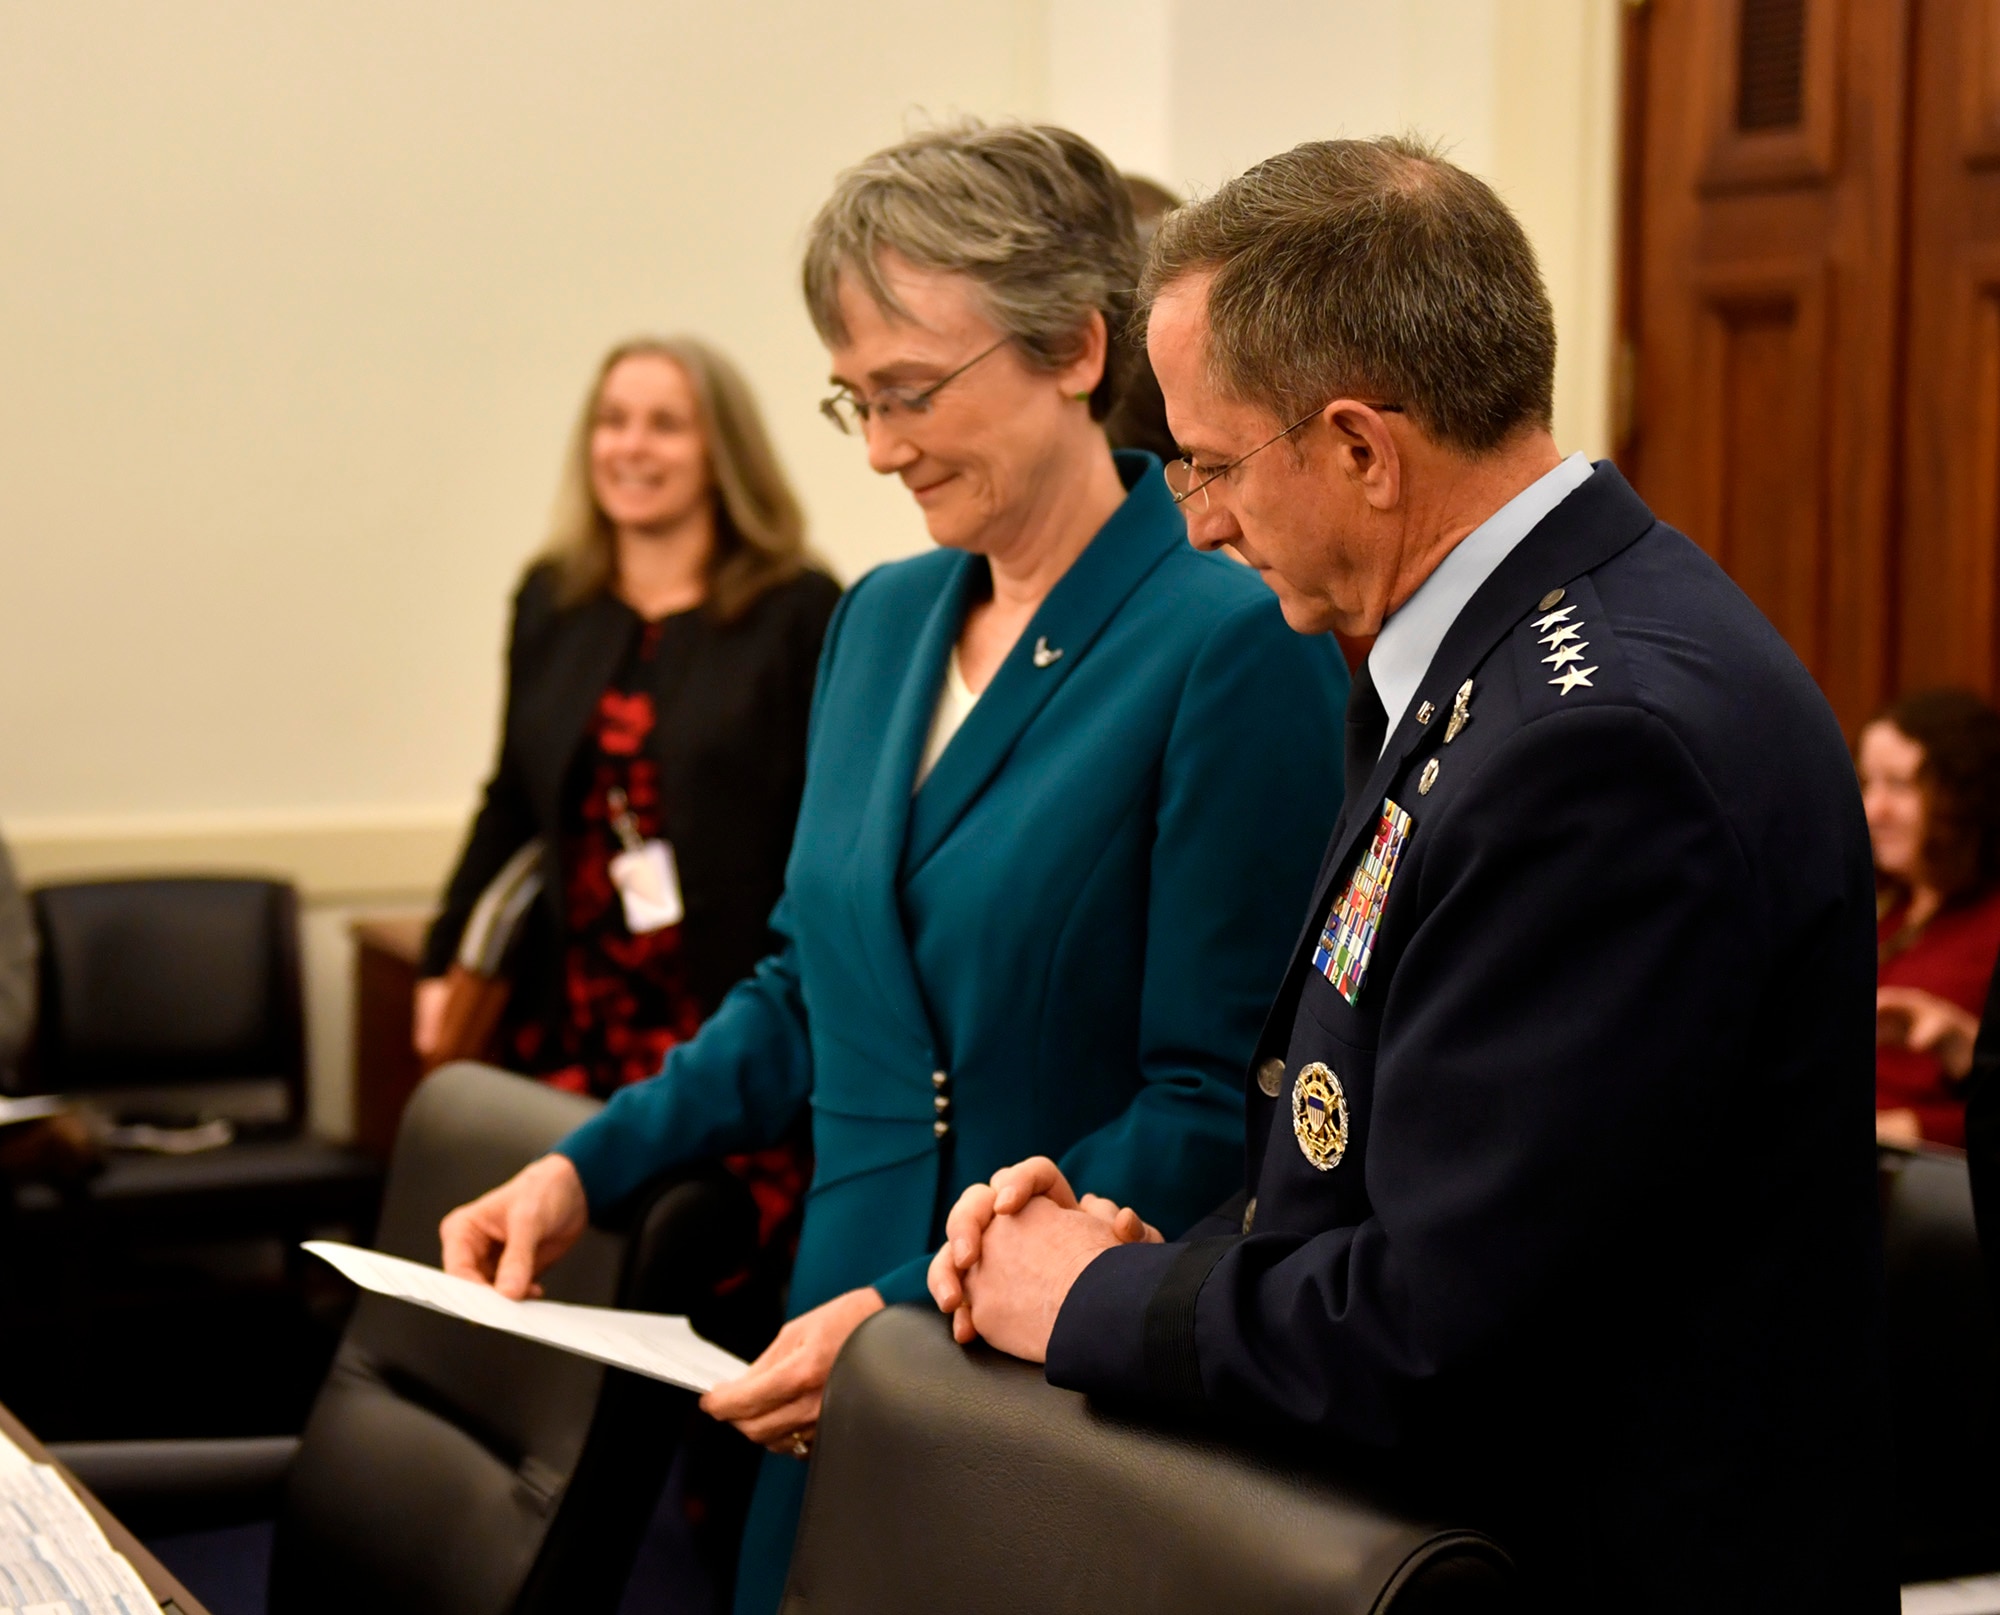 Secretary of the Air Force Heather Wilson and Air Force Chief of Staff Gen. David L. Goldfein prepare to testify before the U.S. House of Representatives Committee on Appropriations about the Air Force’s fiscal year 2019 budget March 14, 2018, in Washington, D.C. (U.S. Air Force photo by Wayne Clark)